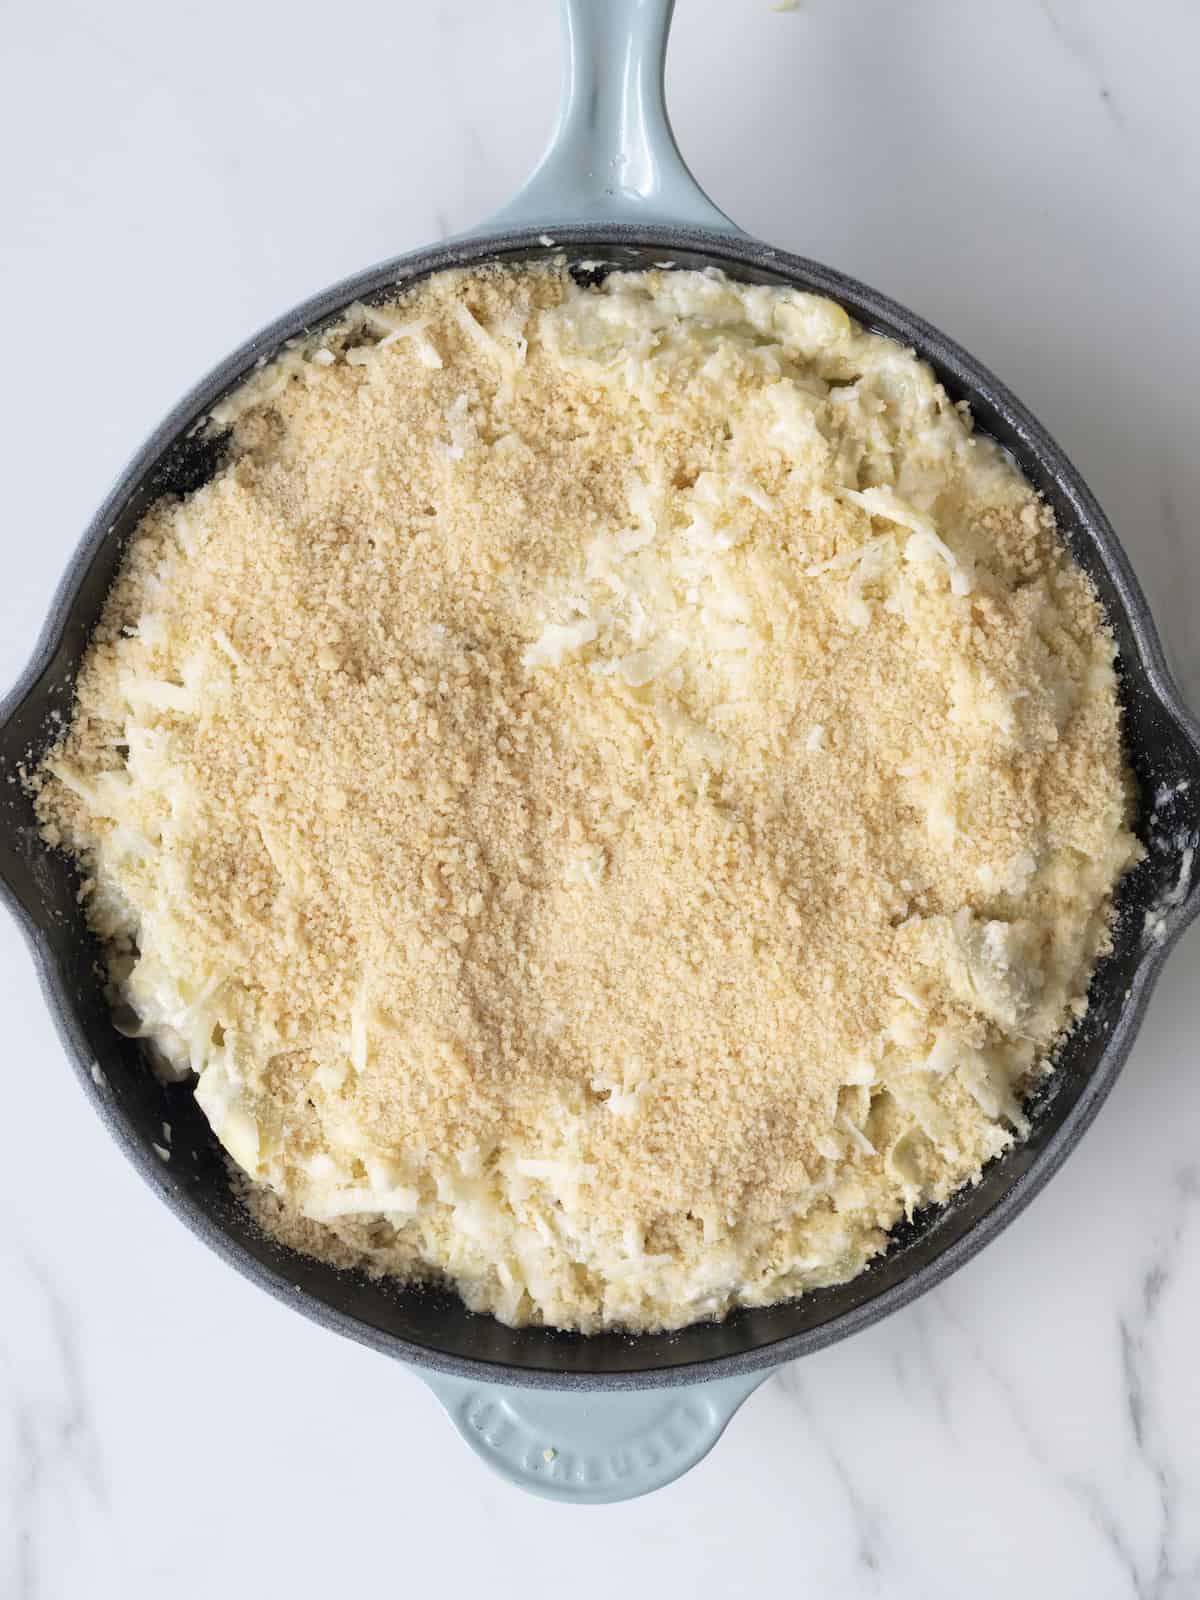 A skillet with cheesy artichoke dip topped with a mixture of parmesan, gruyère, fontina and panko breadcrumbs, ready to be placed in an oven for baking.